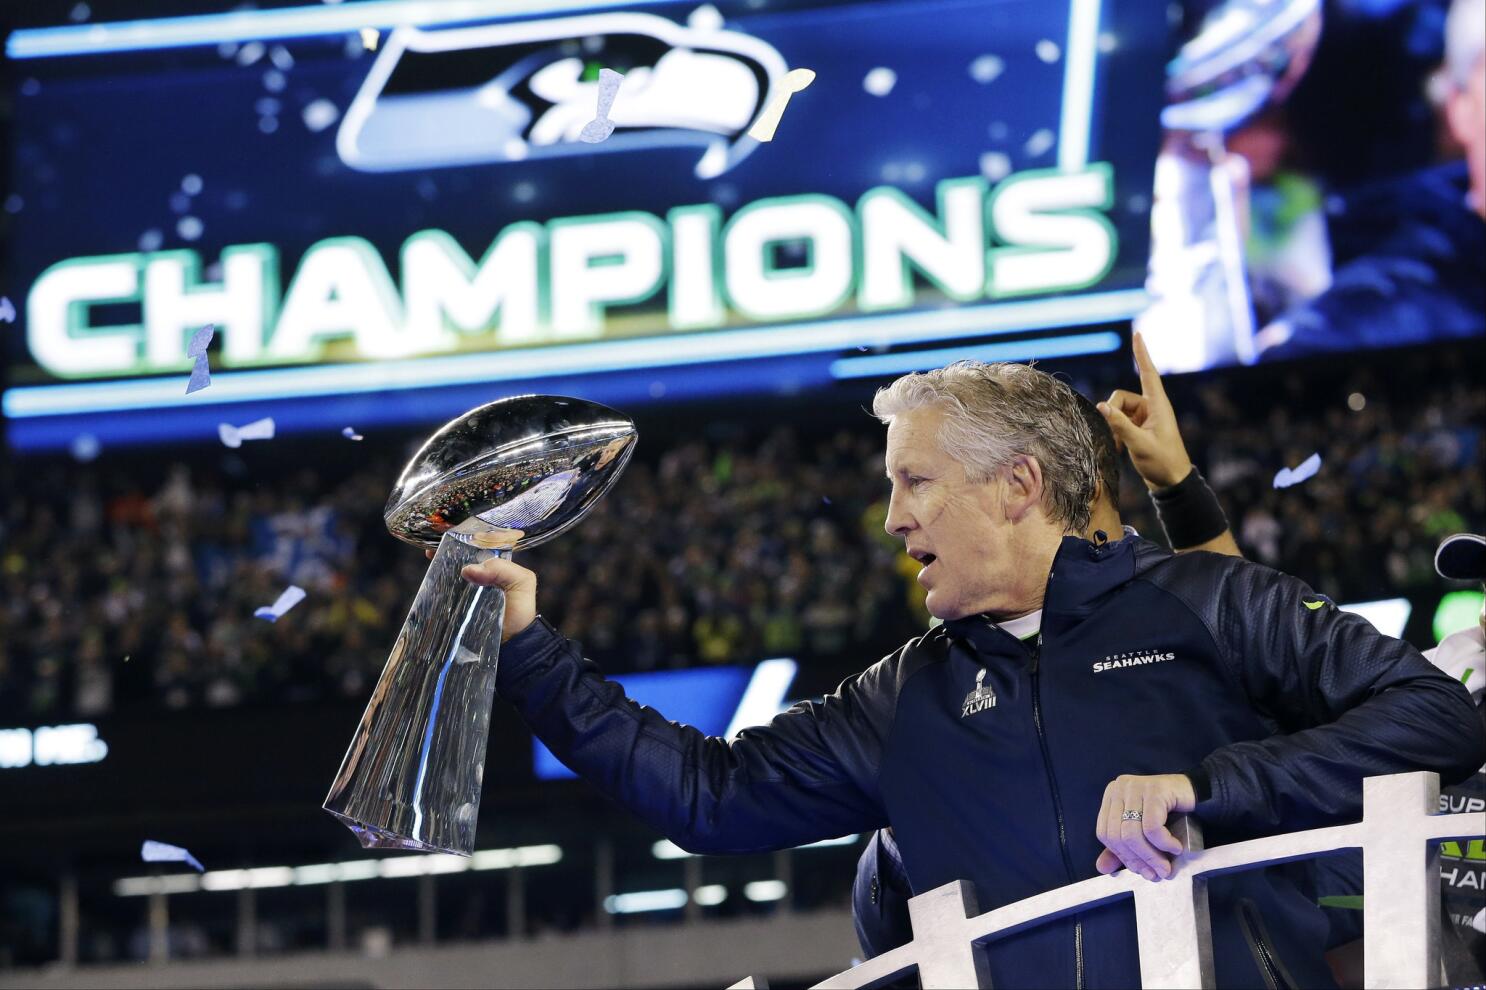 NFL's 2014 saw Seattle Seahawks' glory but also Ray Rice